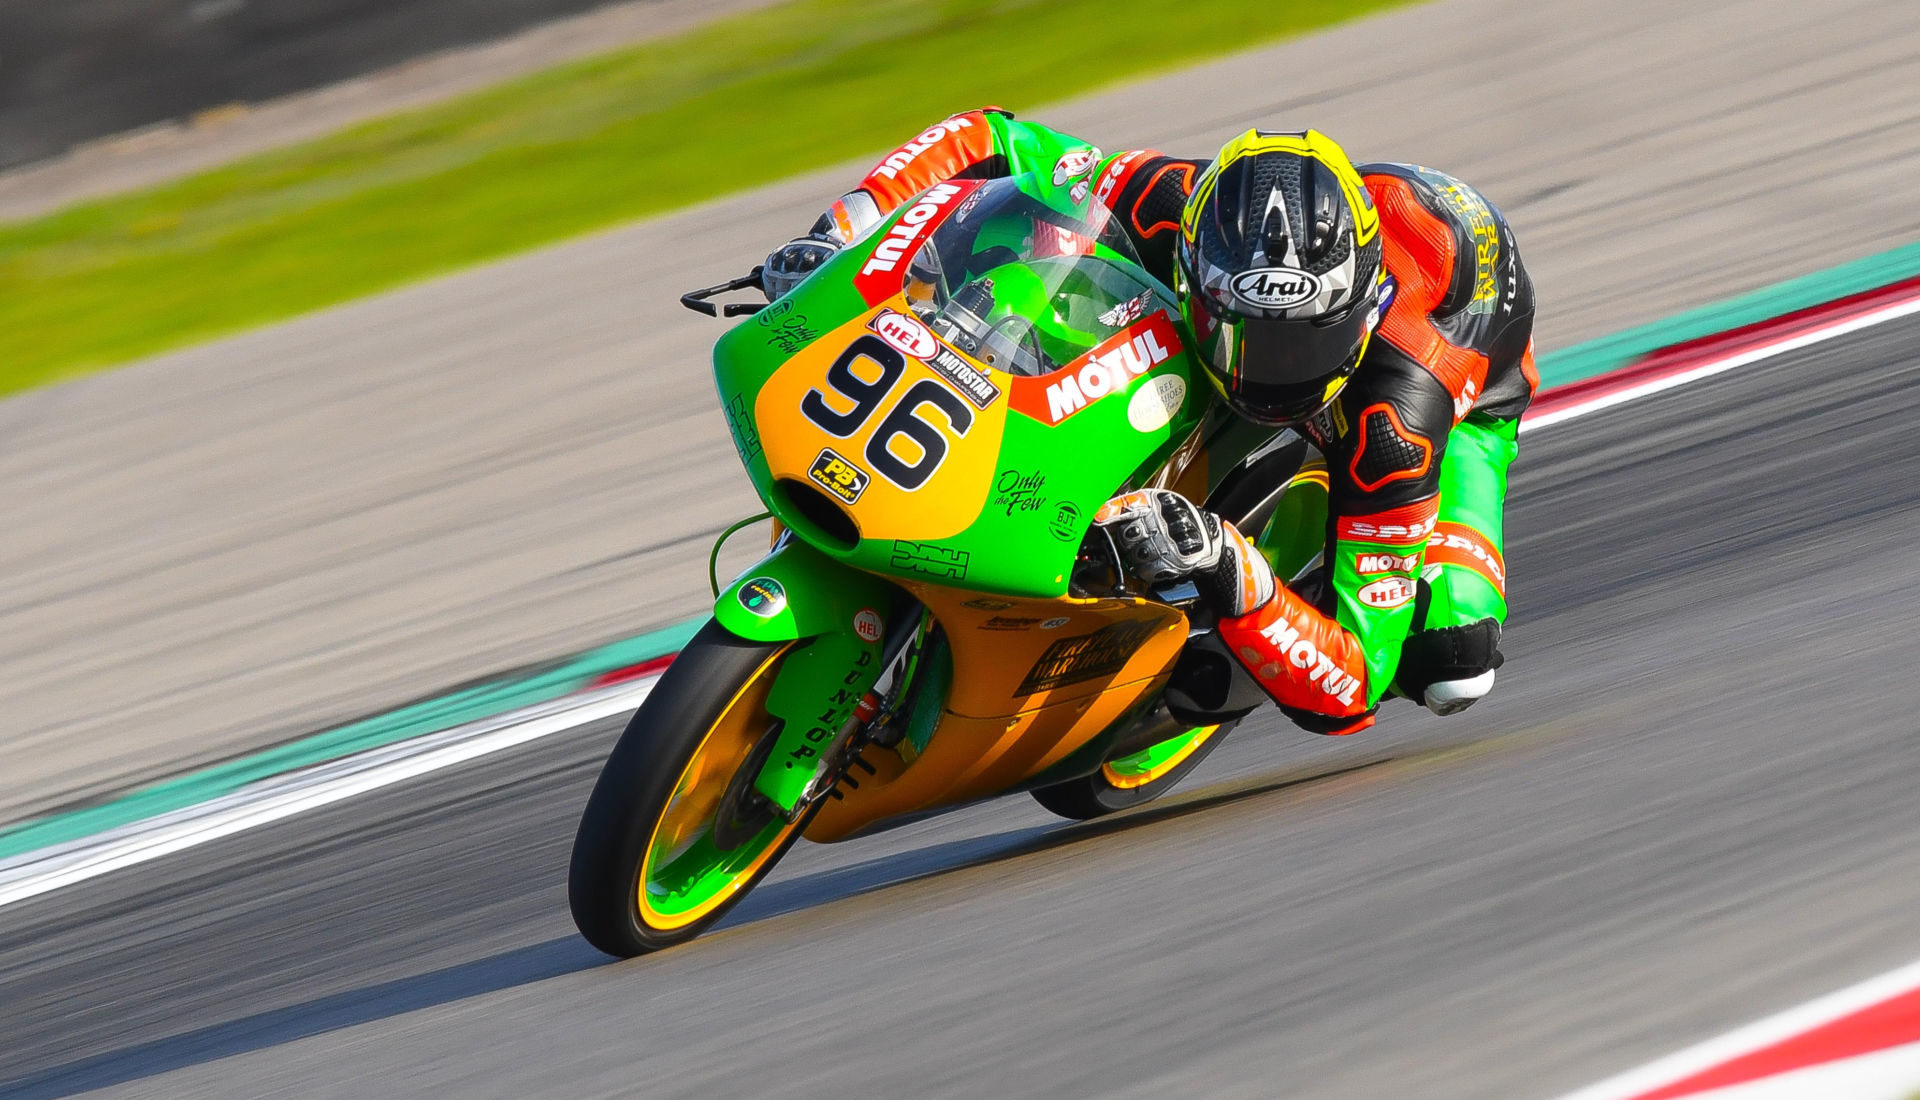 Brandon Paasch (96) in action at Assen. Photo by Camipix Photography, courtesy of Brandon Paasch.